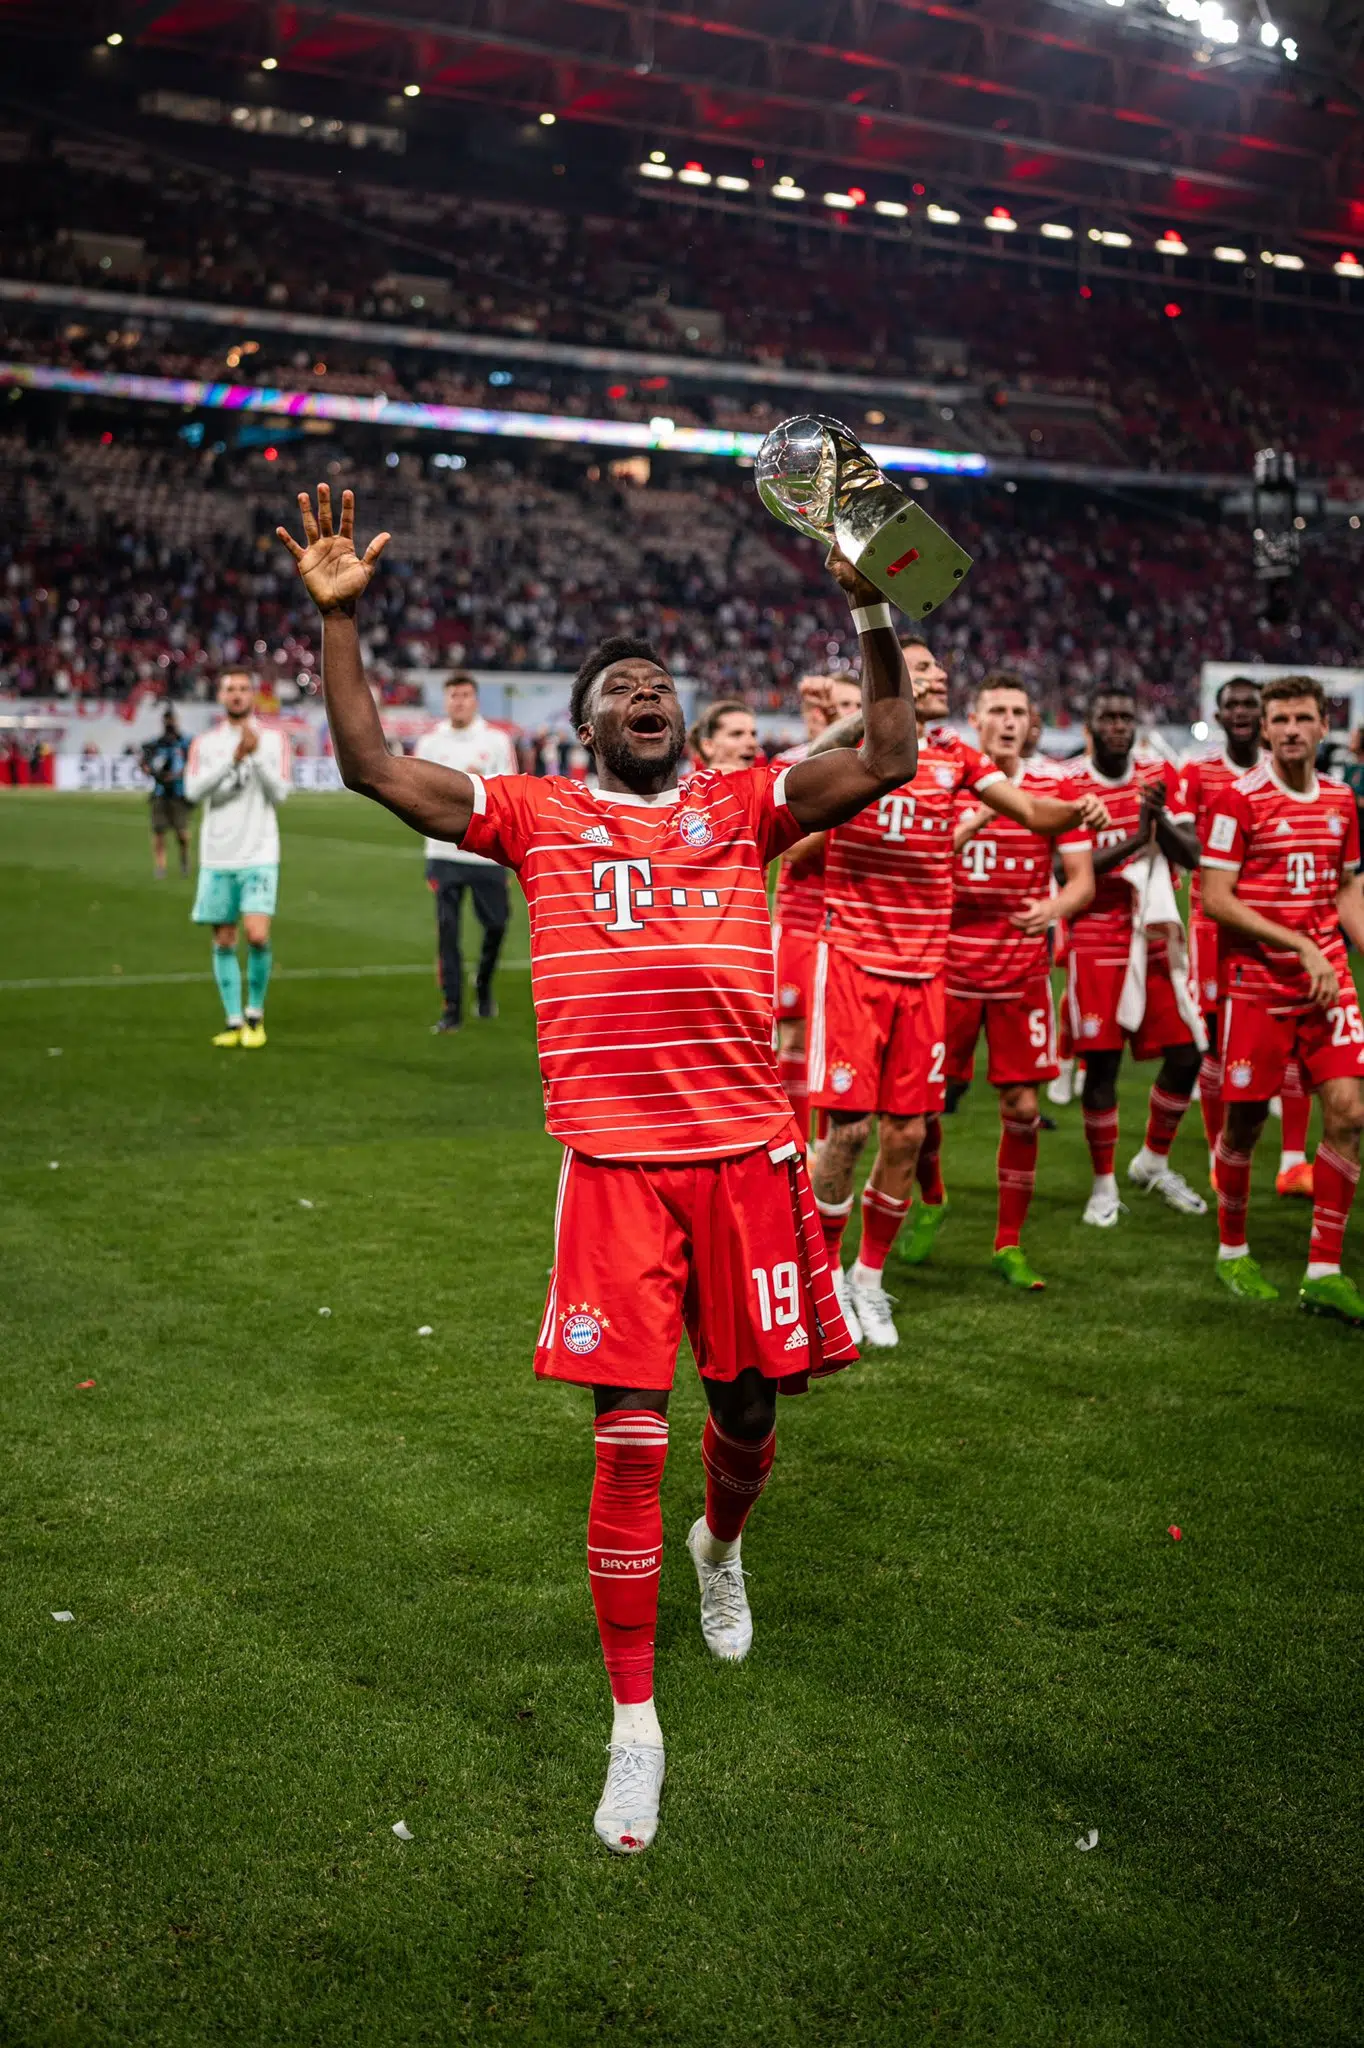 Canadian Soccer Star Alphonso Davies to Donate His World Cup Earnings to Charity